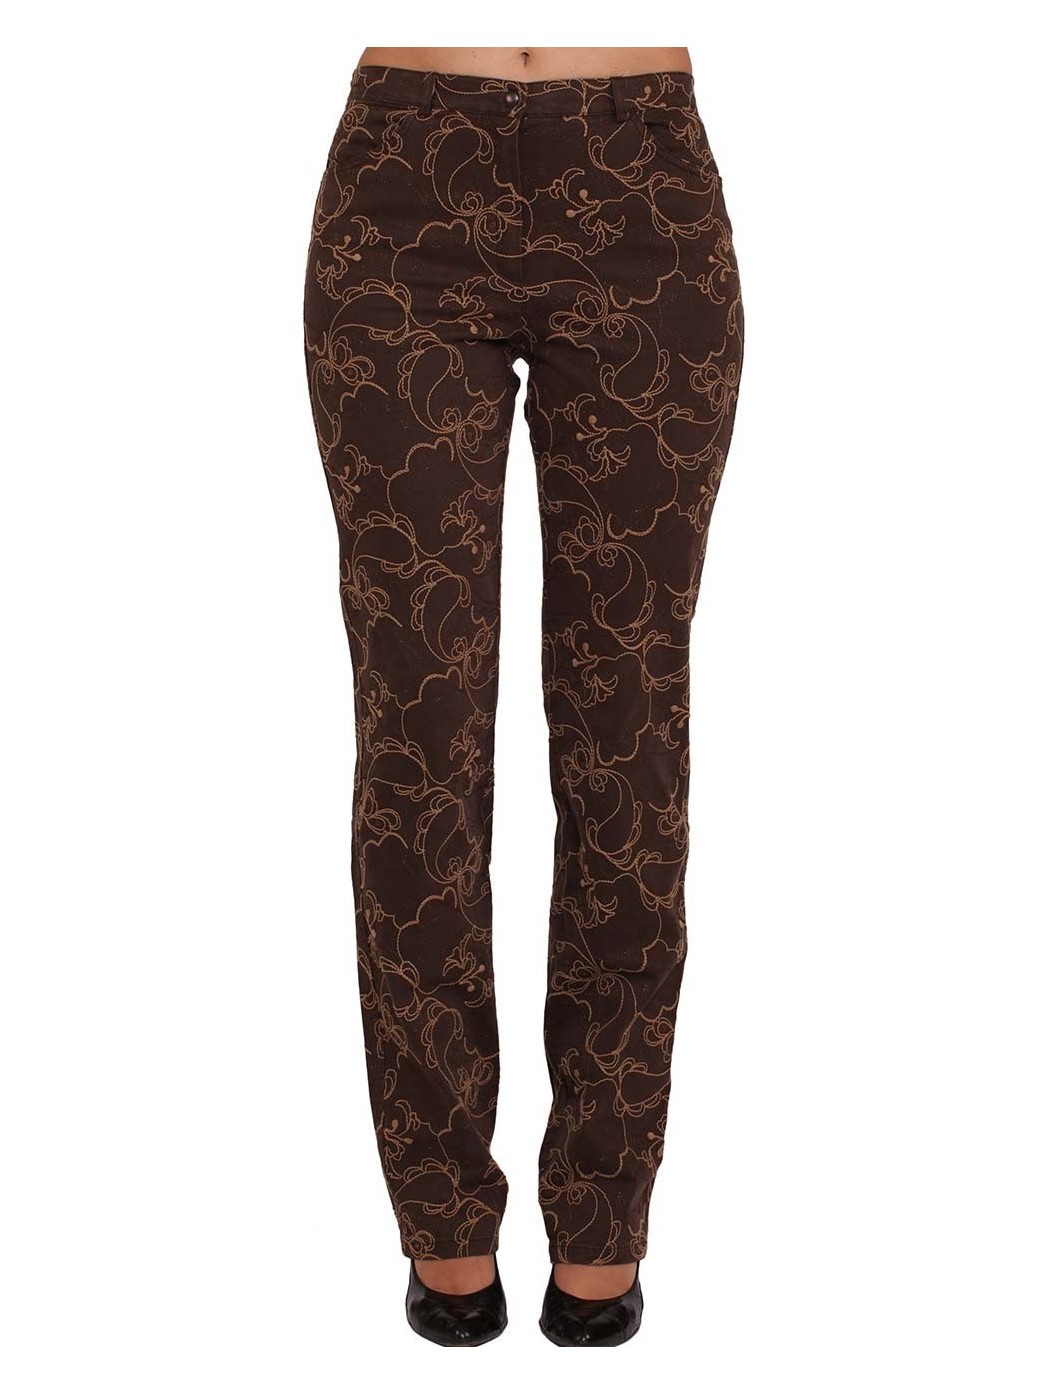 Pucci embroidered trousers